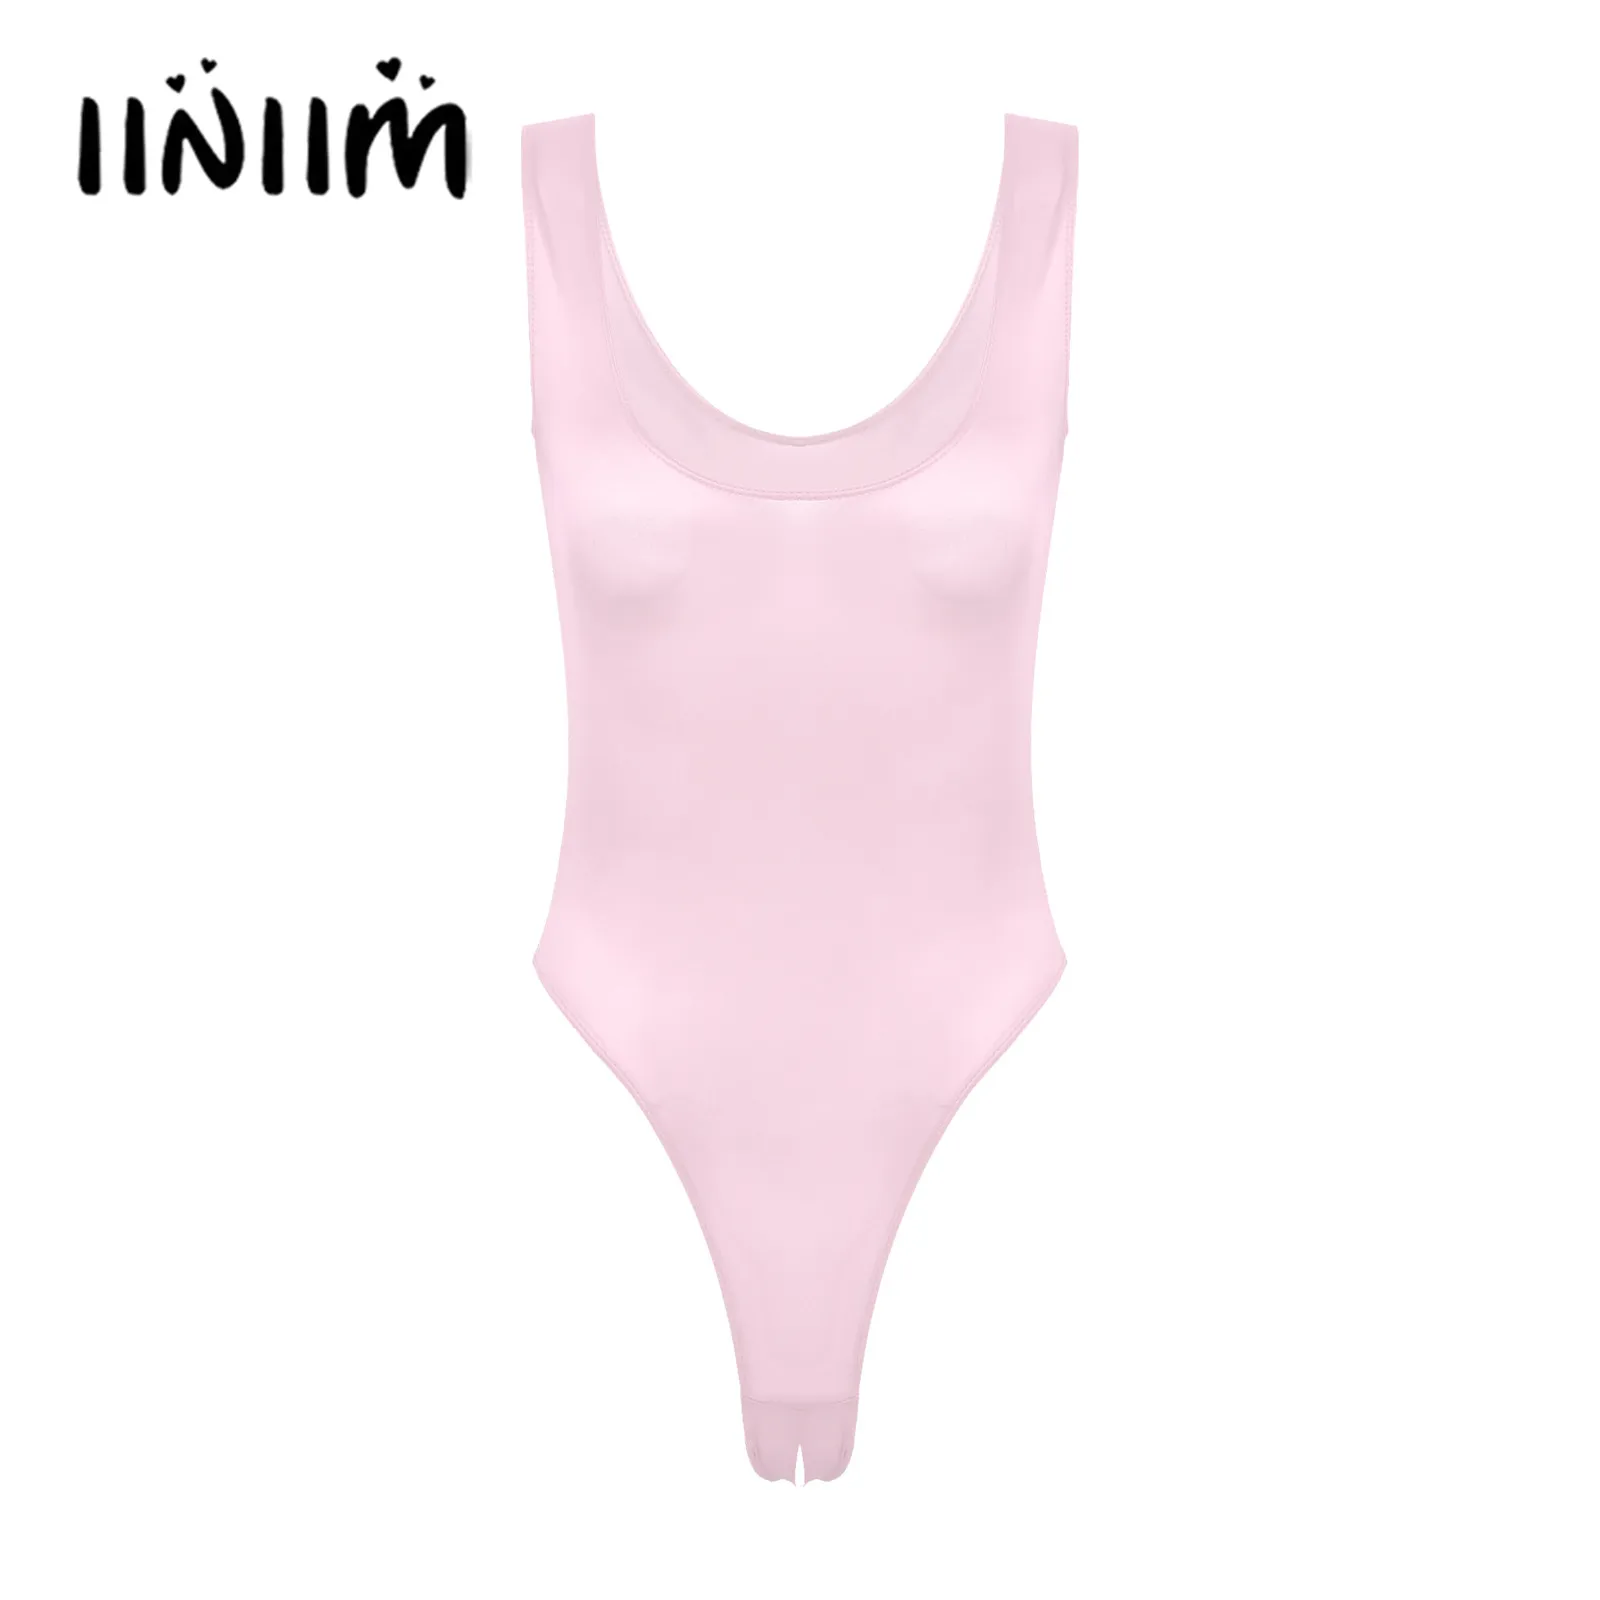 

Womens Lingerie Crotchless Bodysuit Glossy Stretchy Scoop Neck Teddies Costume See-through High Cut Thong Leotard Nightwear